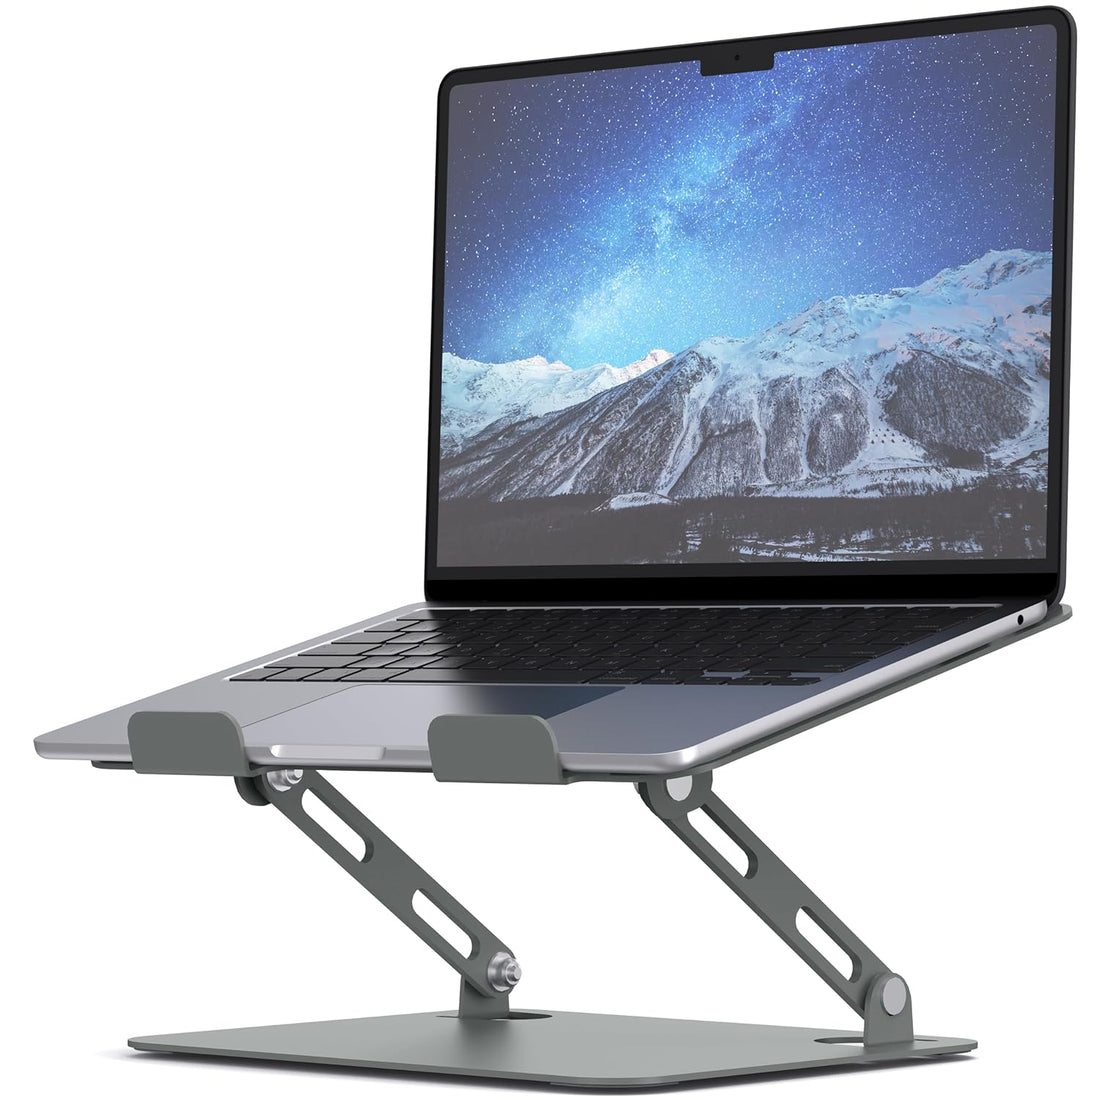 SOUNDANCE Laptop Stand for Desk with Stable Heavy Base, Adjustable Height Multi-Angle, Ergonomic Metal Riser Holder, Foldable Mount Elevator, Compatible with 10 to 15.6 Inches PC Computer, Grey